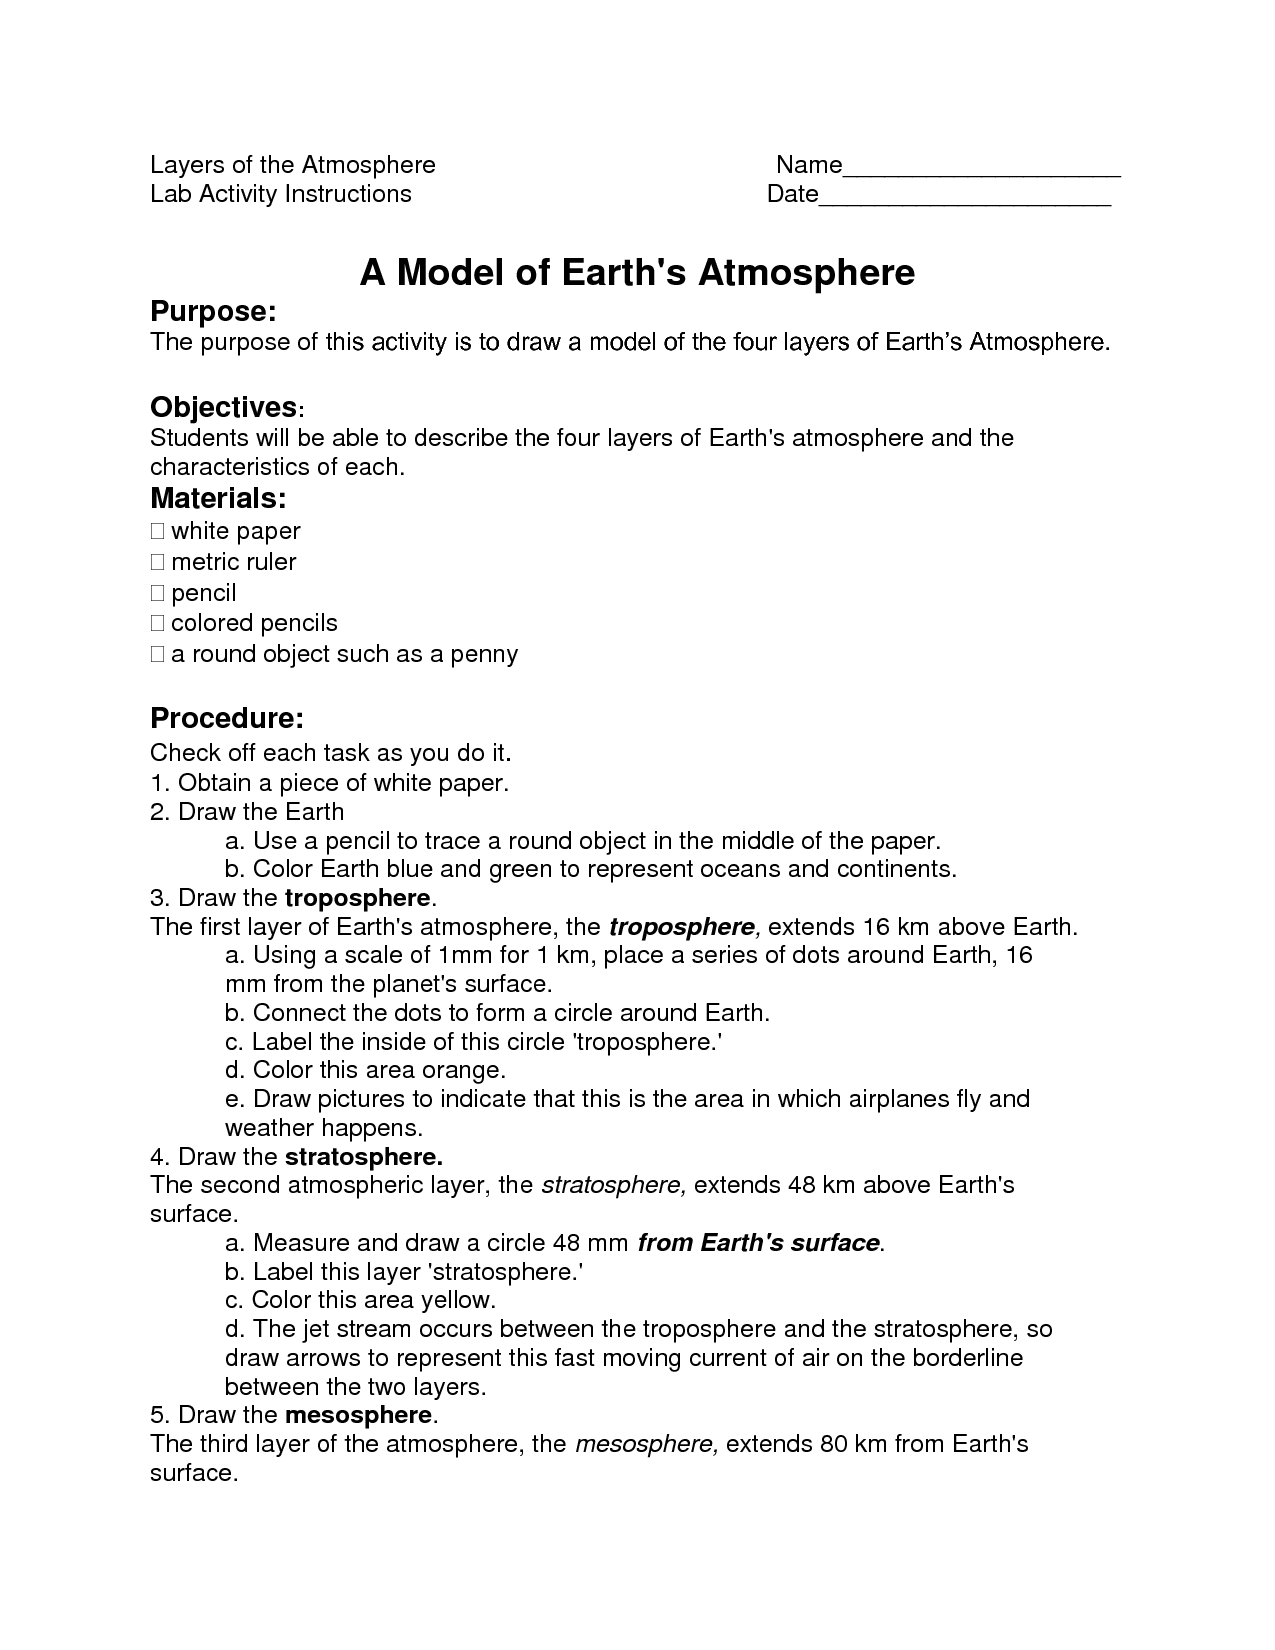 Layers Of The Atmosphere Worksheet